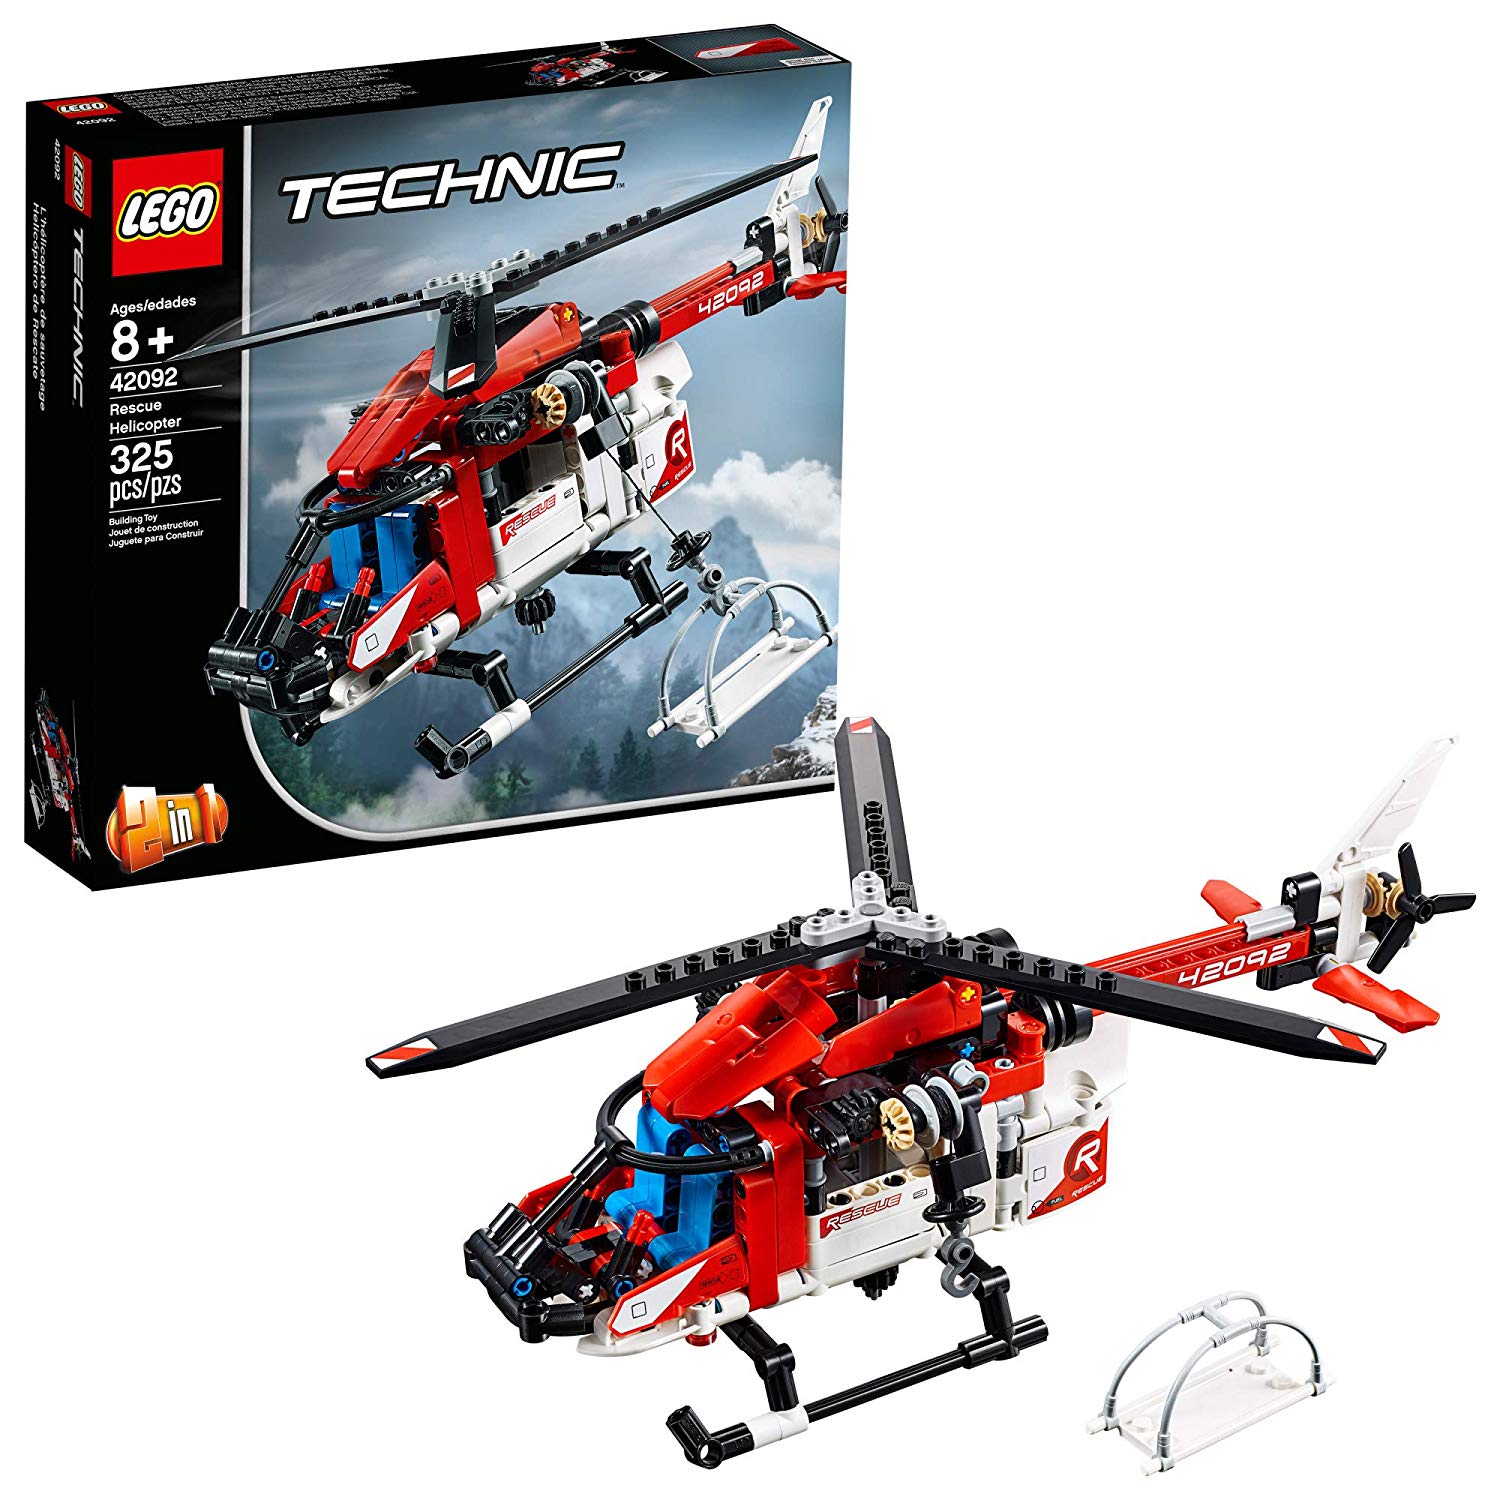 Technic Lego 42092 Rescue Helicopter Construction Kit New 2019 (325 Pieces)